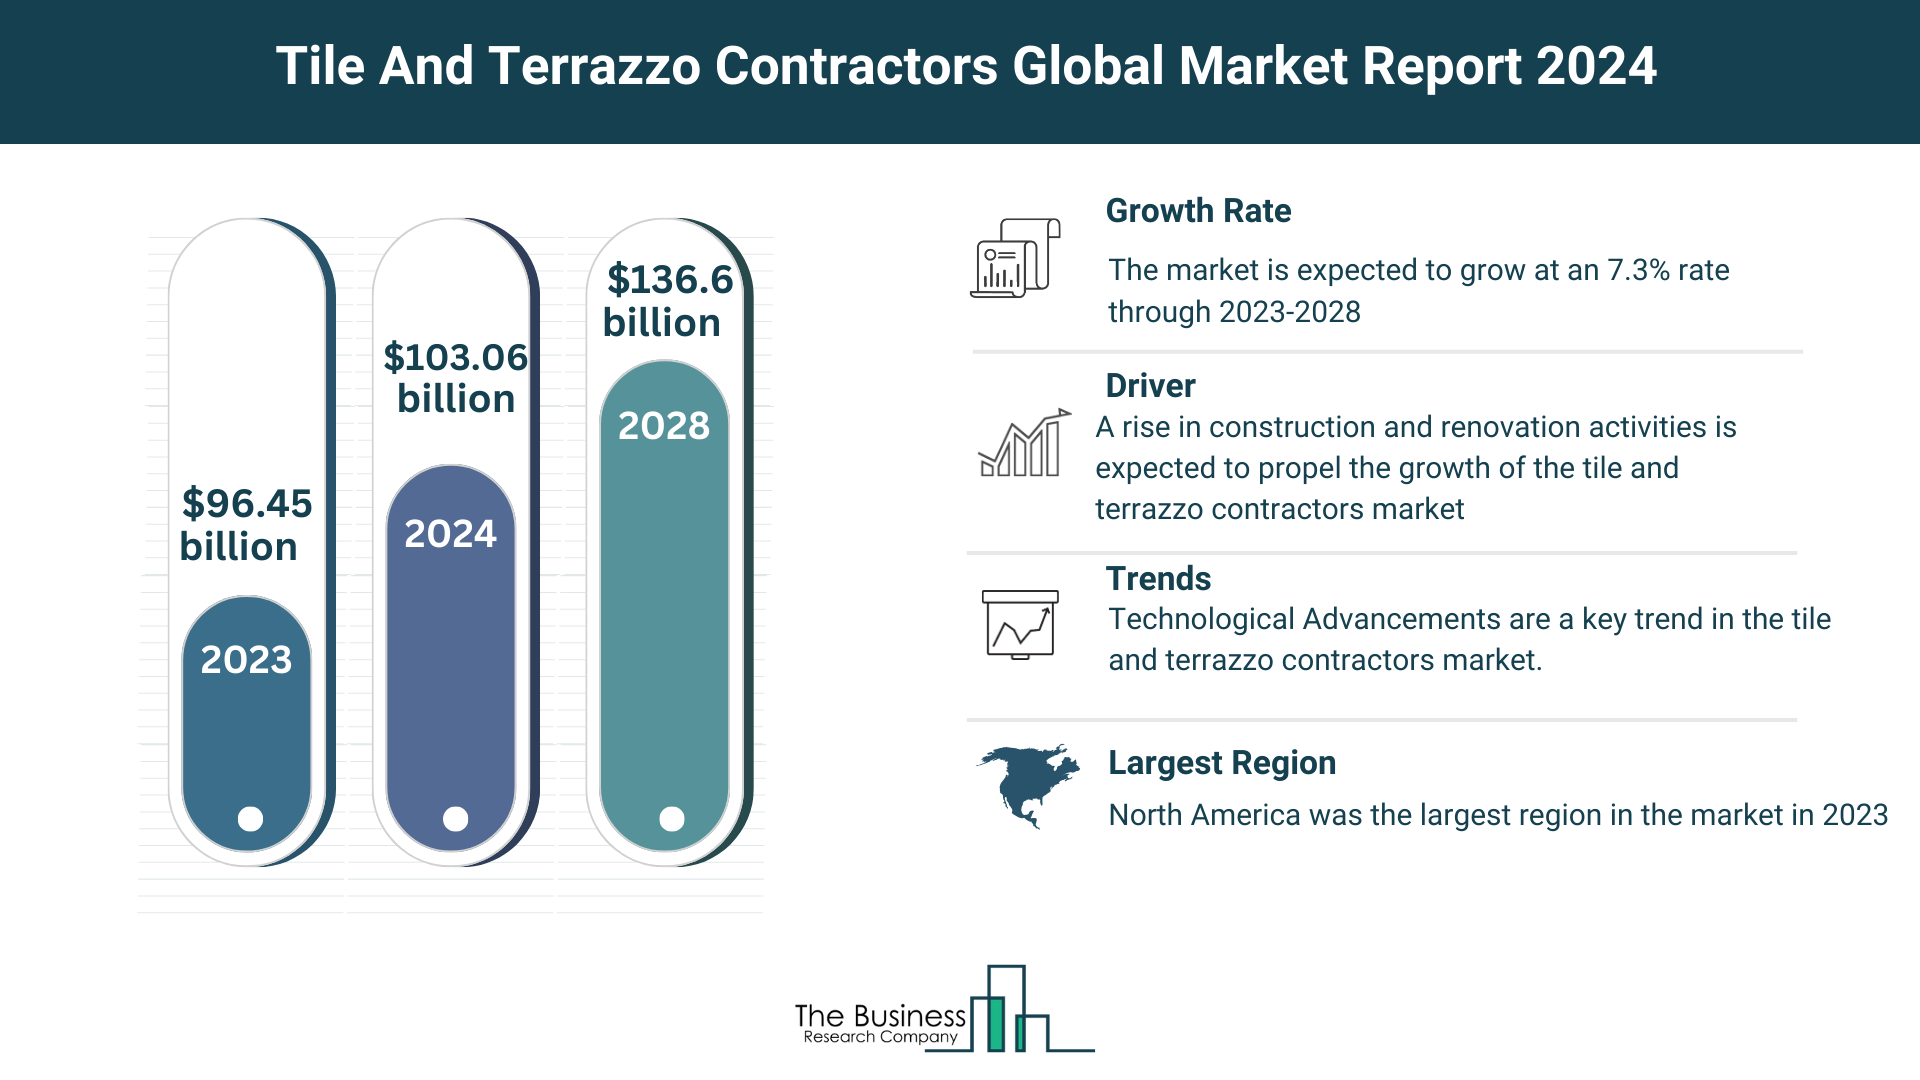 Global Tile And Terrazzo Contractors Market Analysis: Size, Drivers, Trends, Opportunities And Strategies